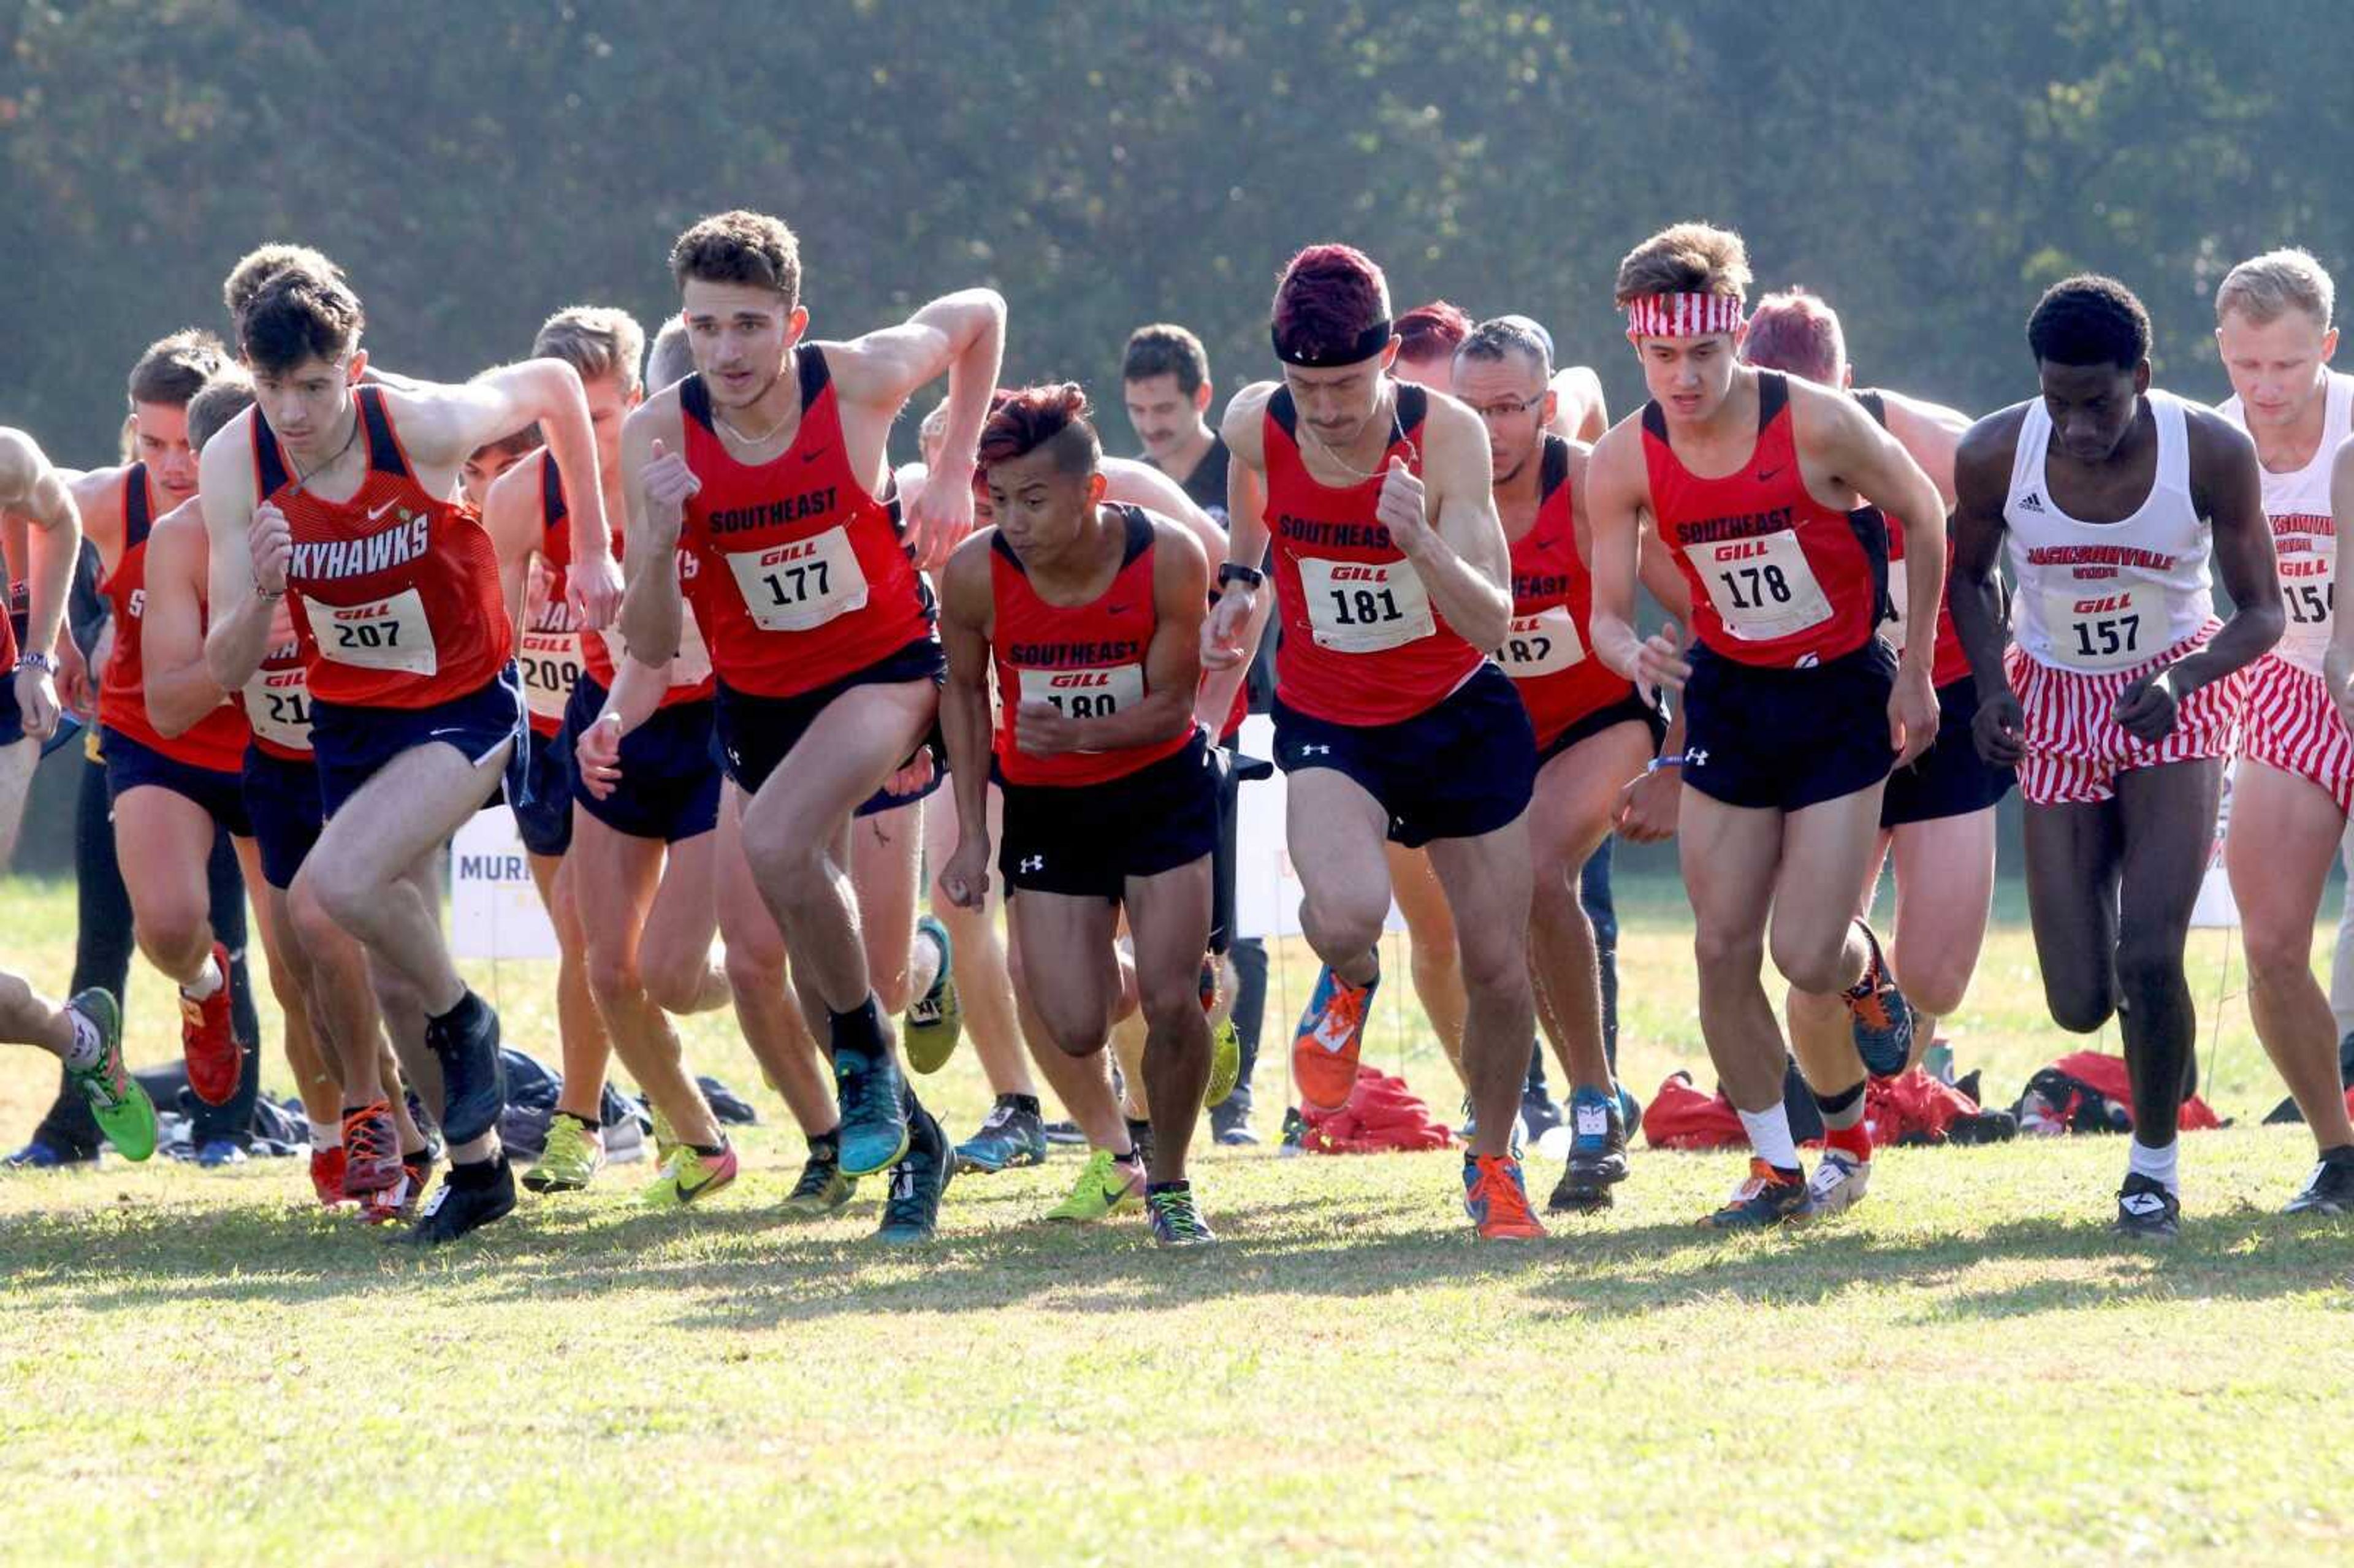 Runners from multiple schools kick off the OVC cross country championship in Cape Girardeau on Oct. 27.